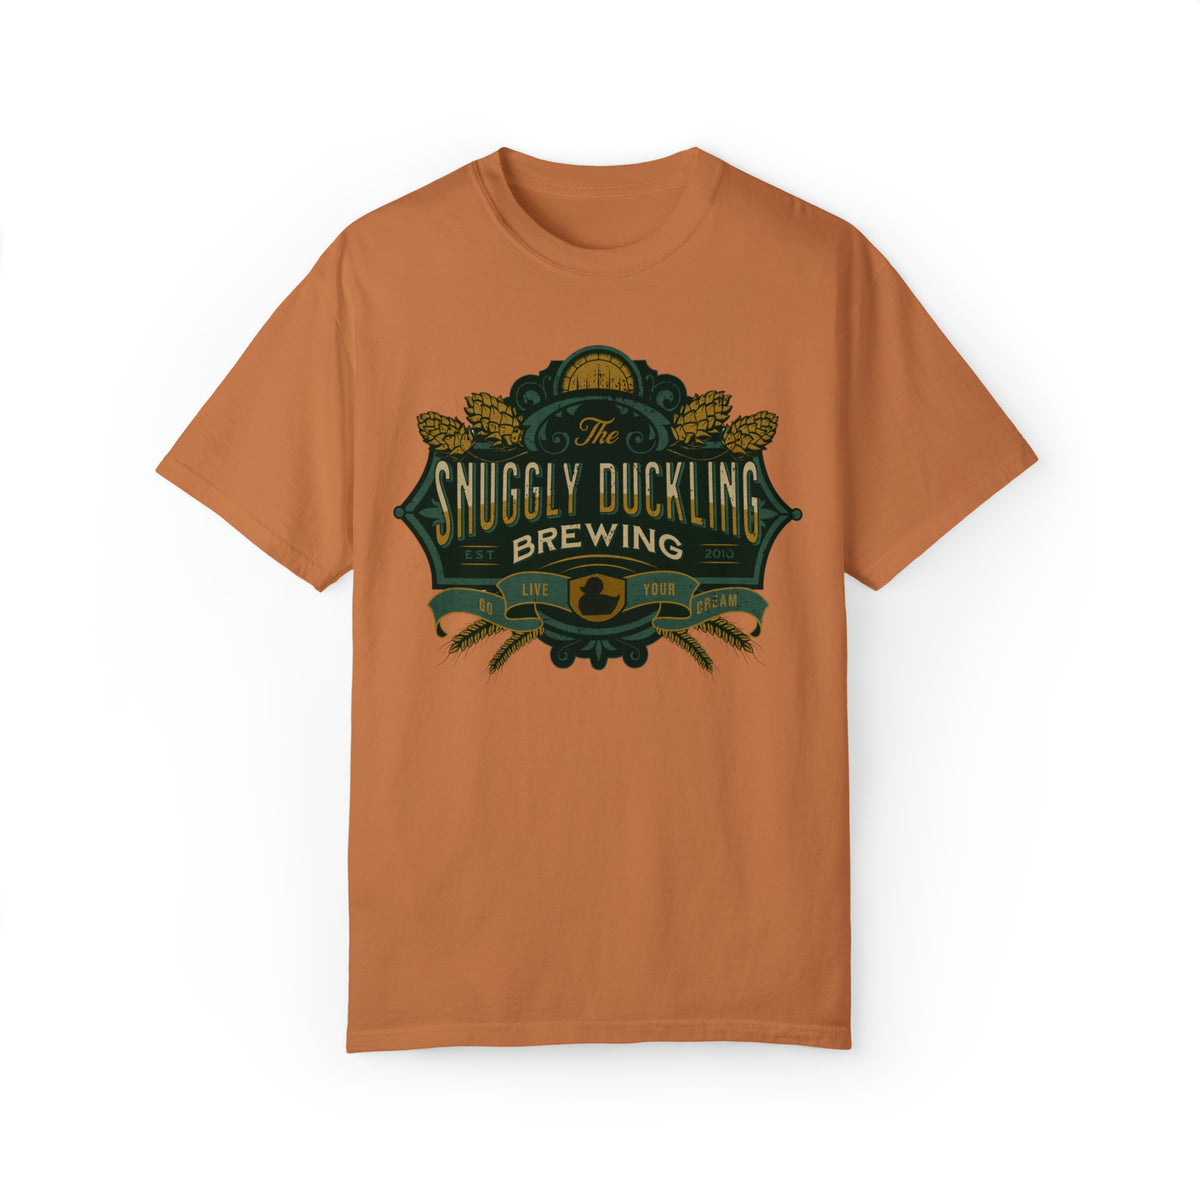 The Snuggly Duckling Brewing Comfort Colors Unisex Garment-Dyed T-shirt